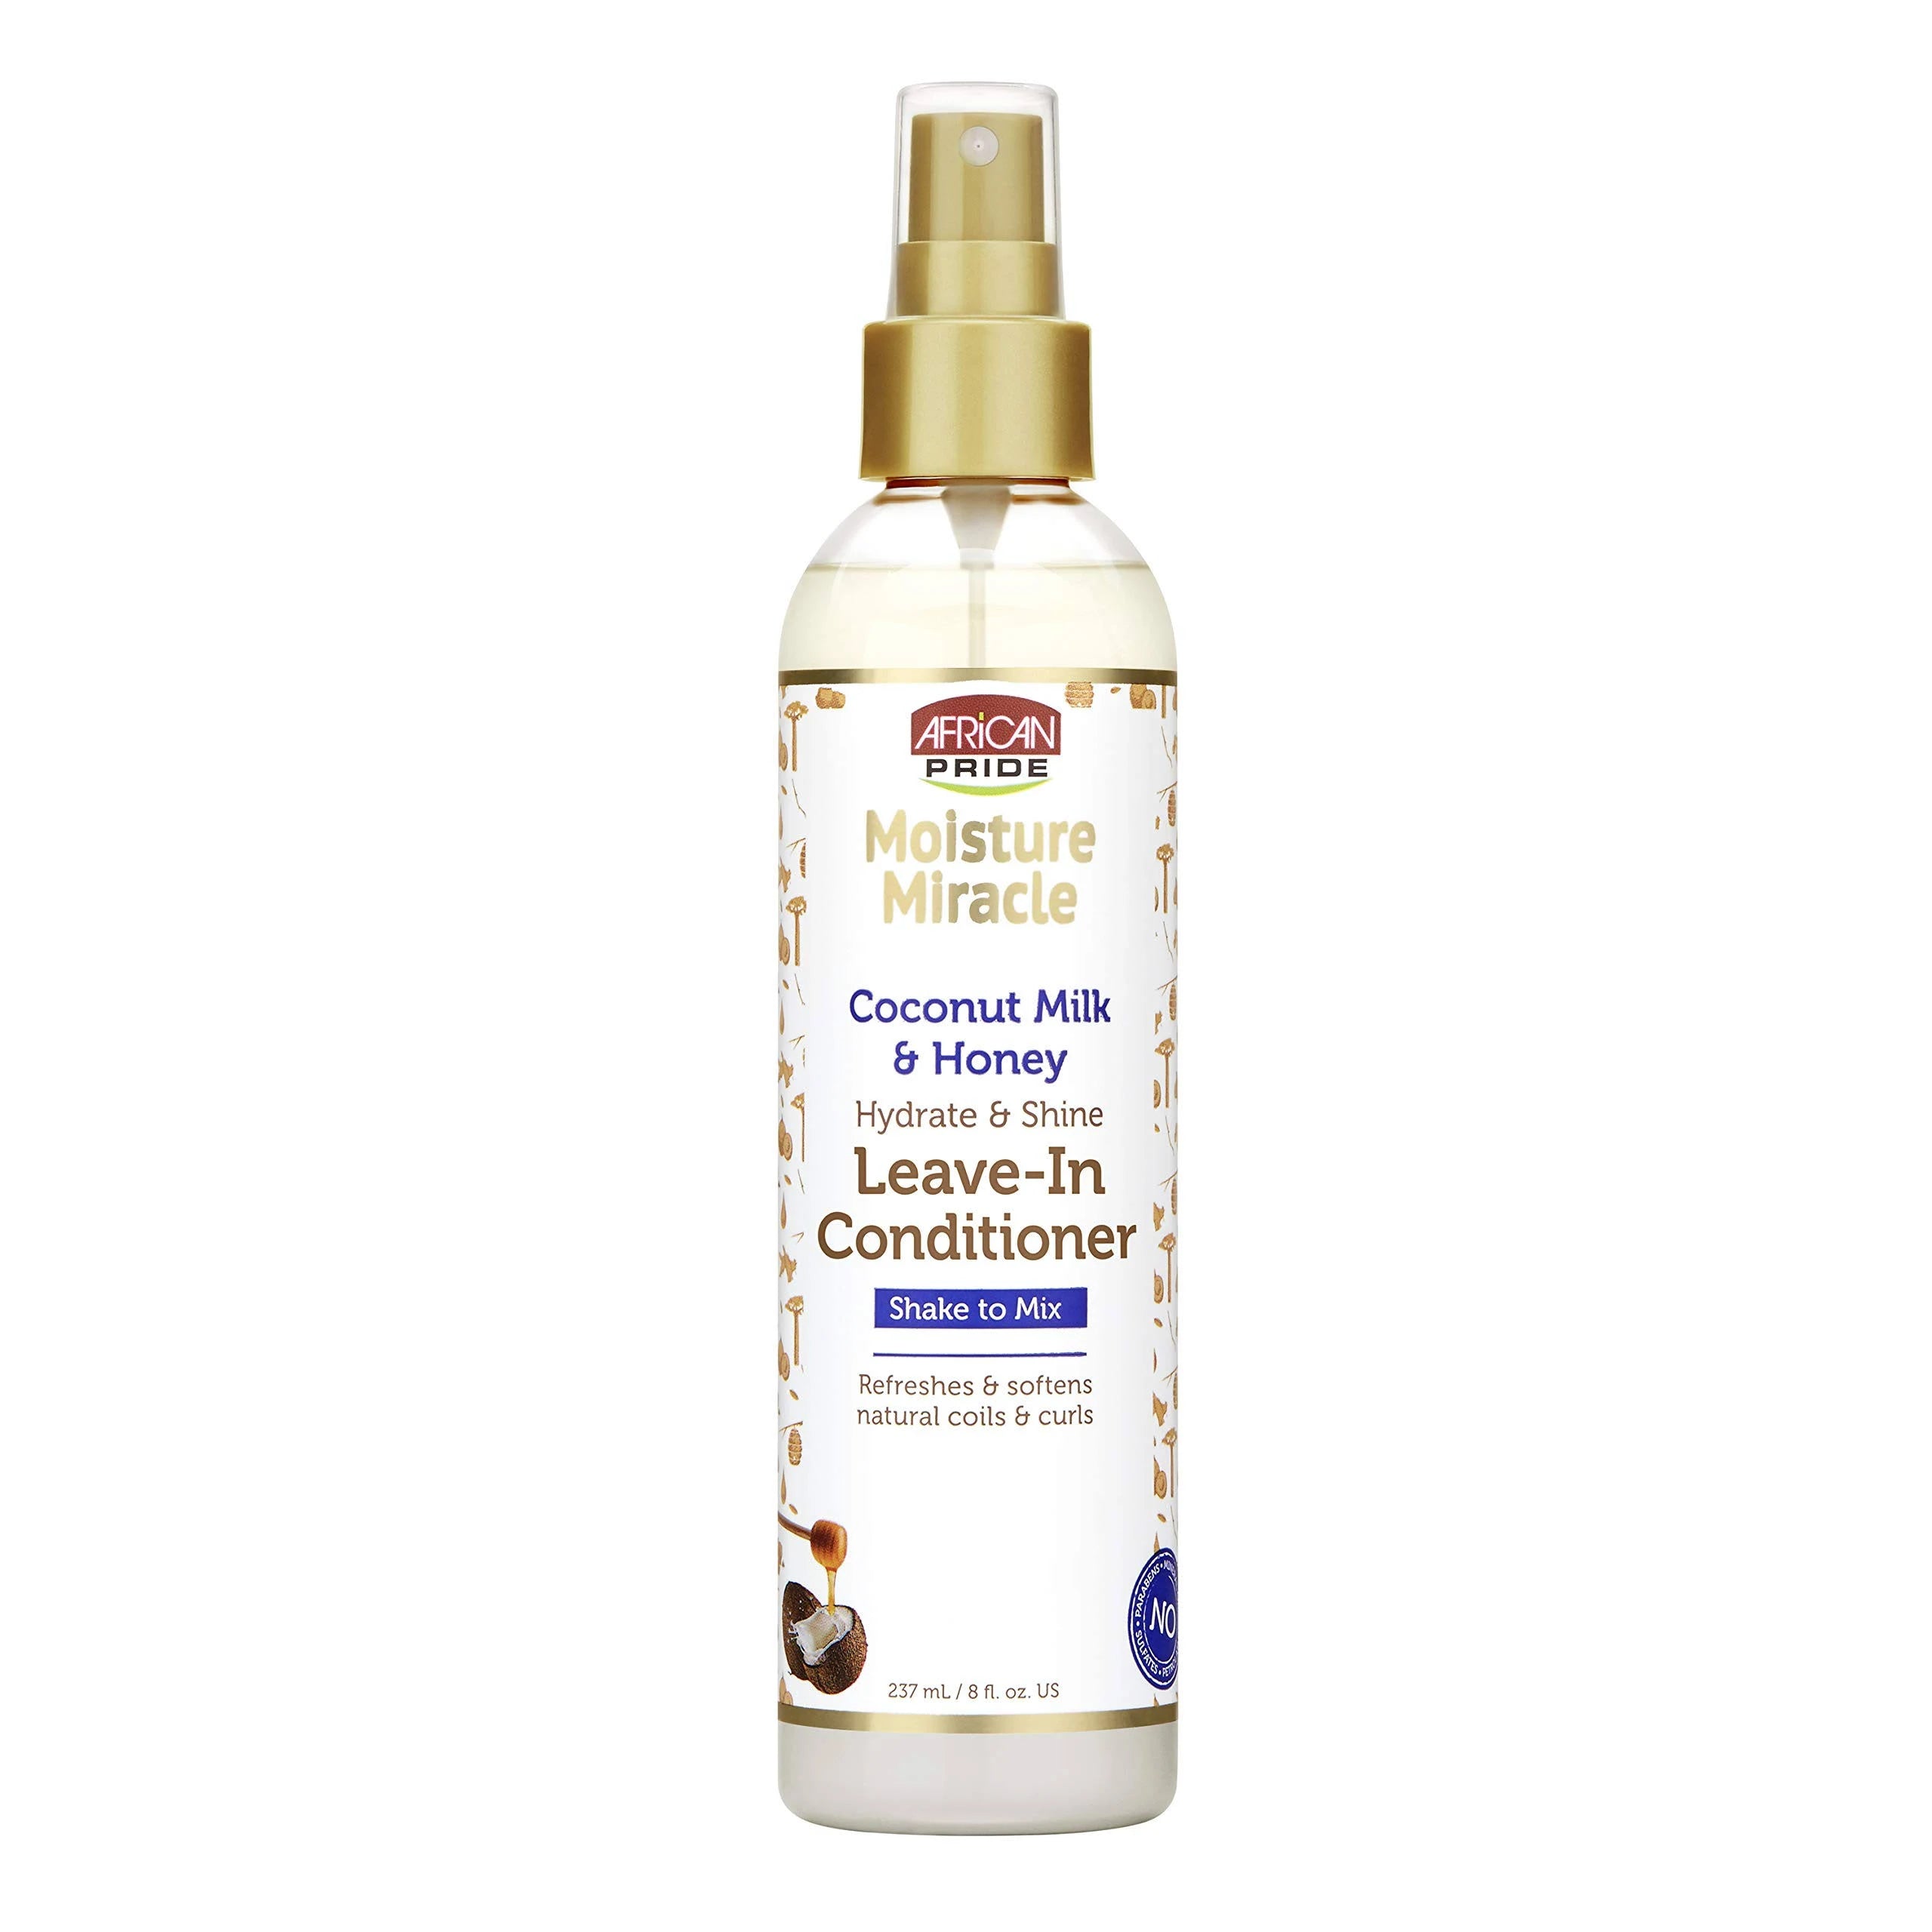 AFRICAN PRIDE MOISTURE MIRACLE COCONUT MILK &amp; HONEY LEAVE-IN CONDITIONER